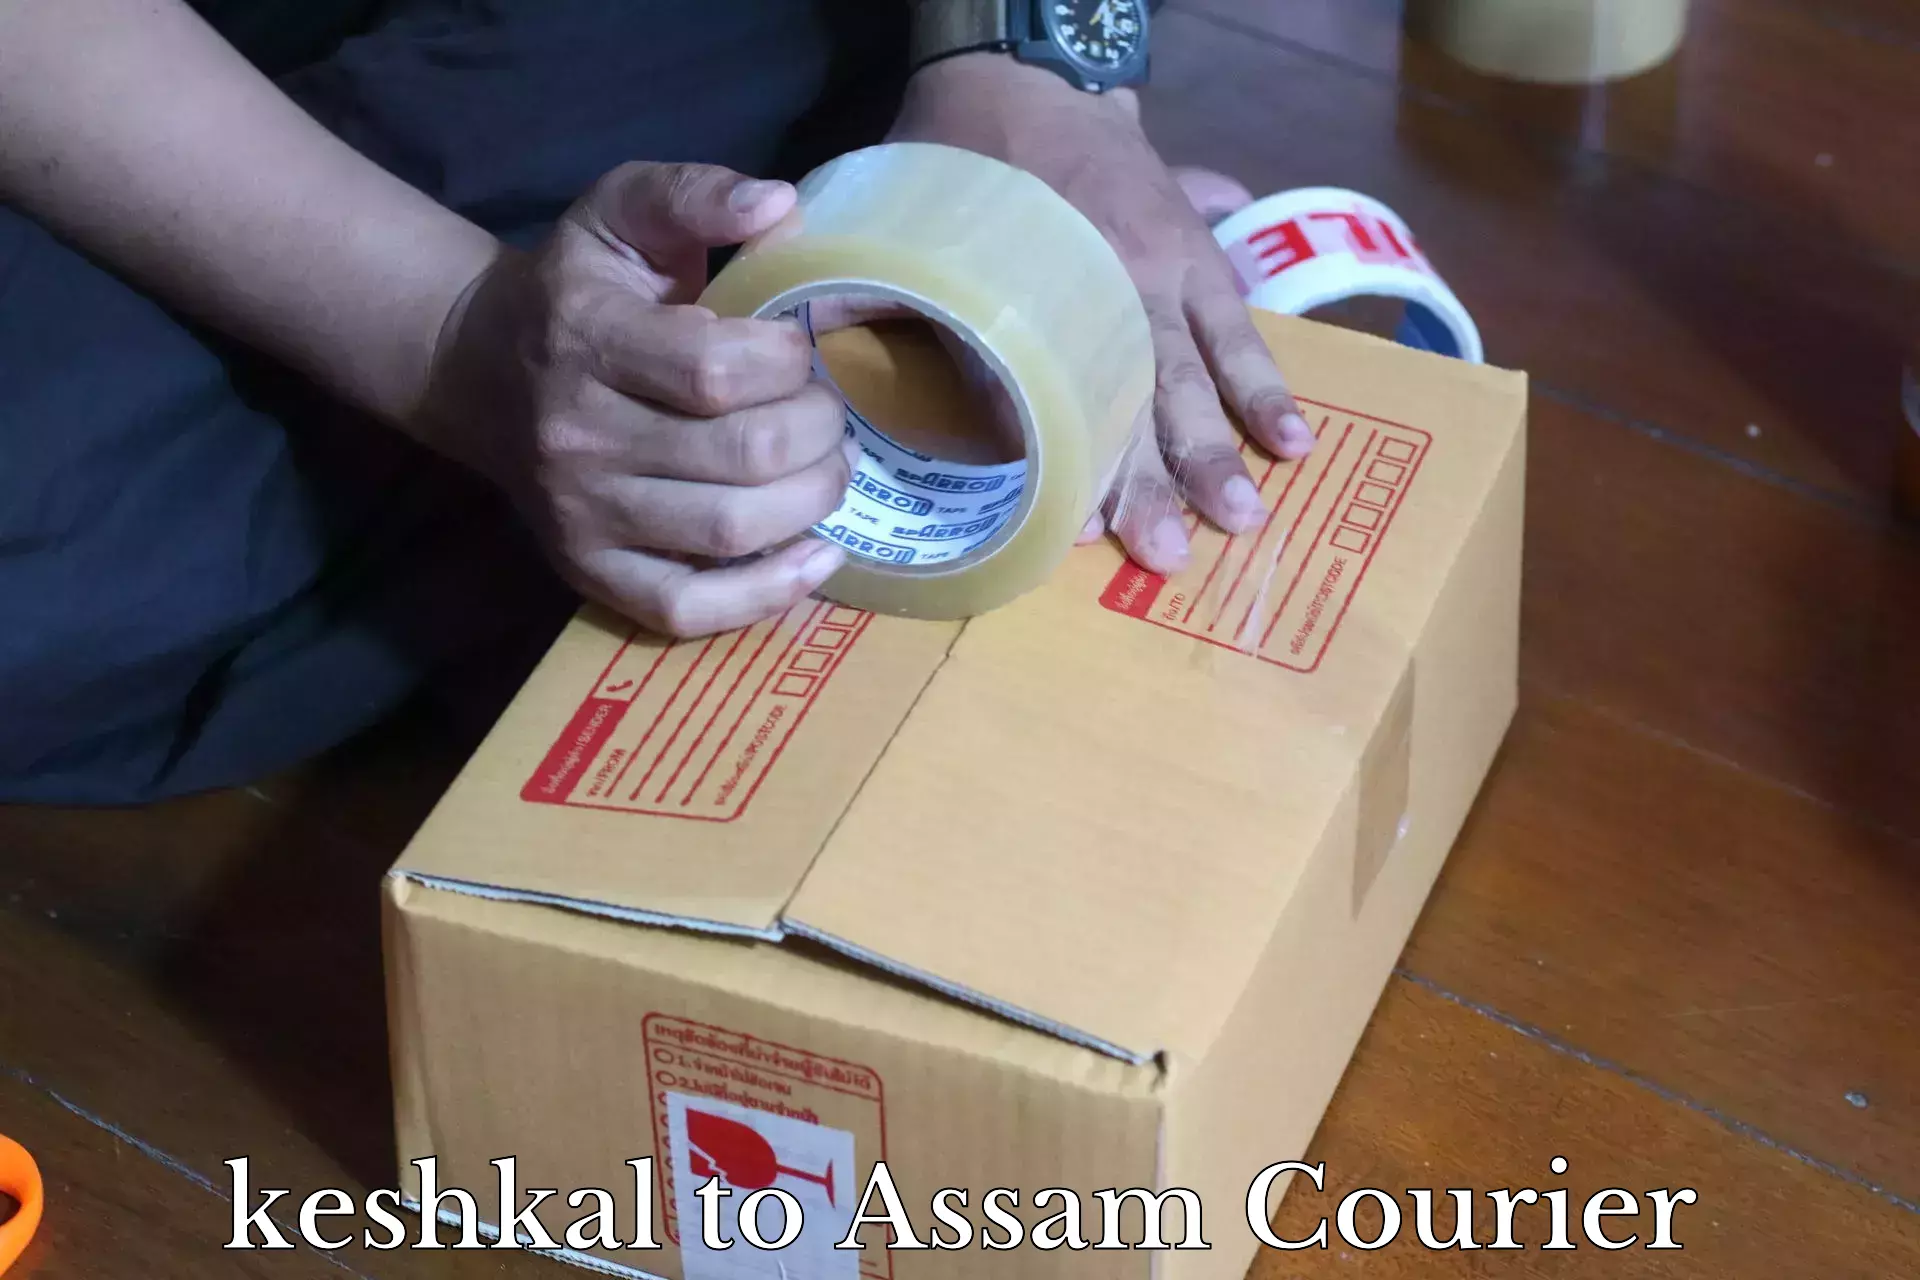 Dynamic courier operations keshkal to Lala Assam